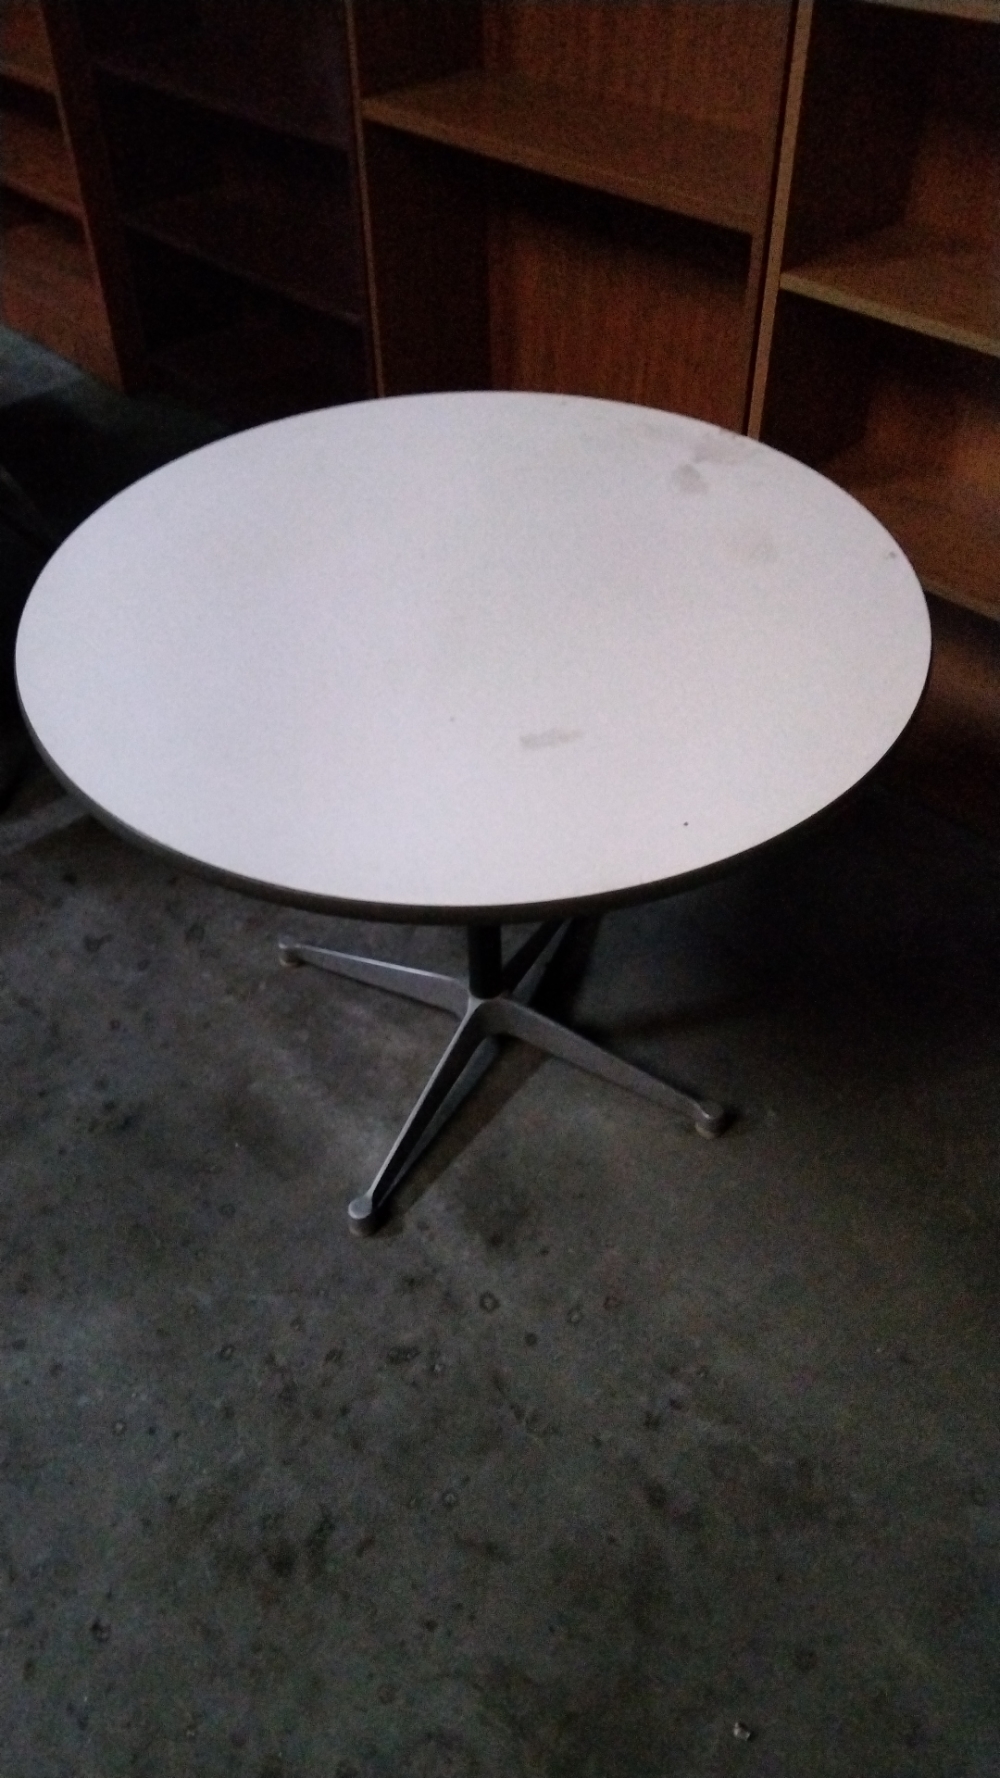  3' round table